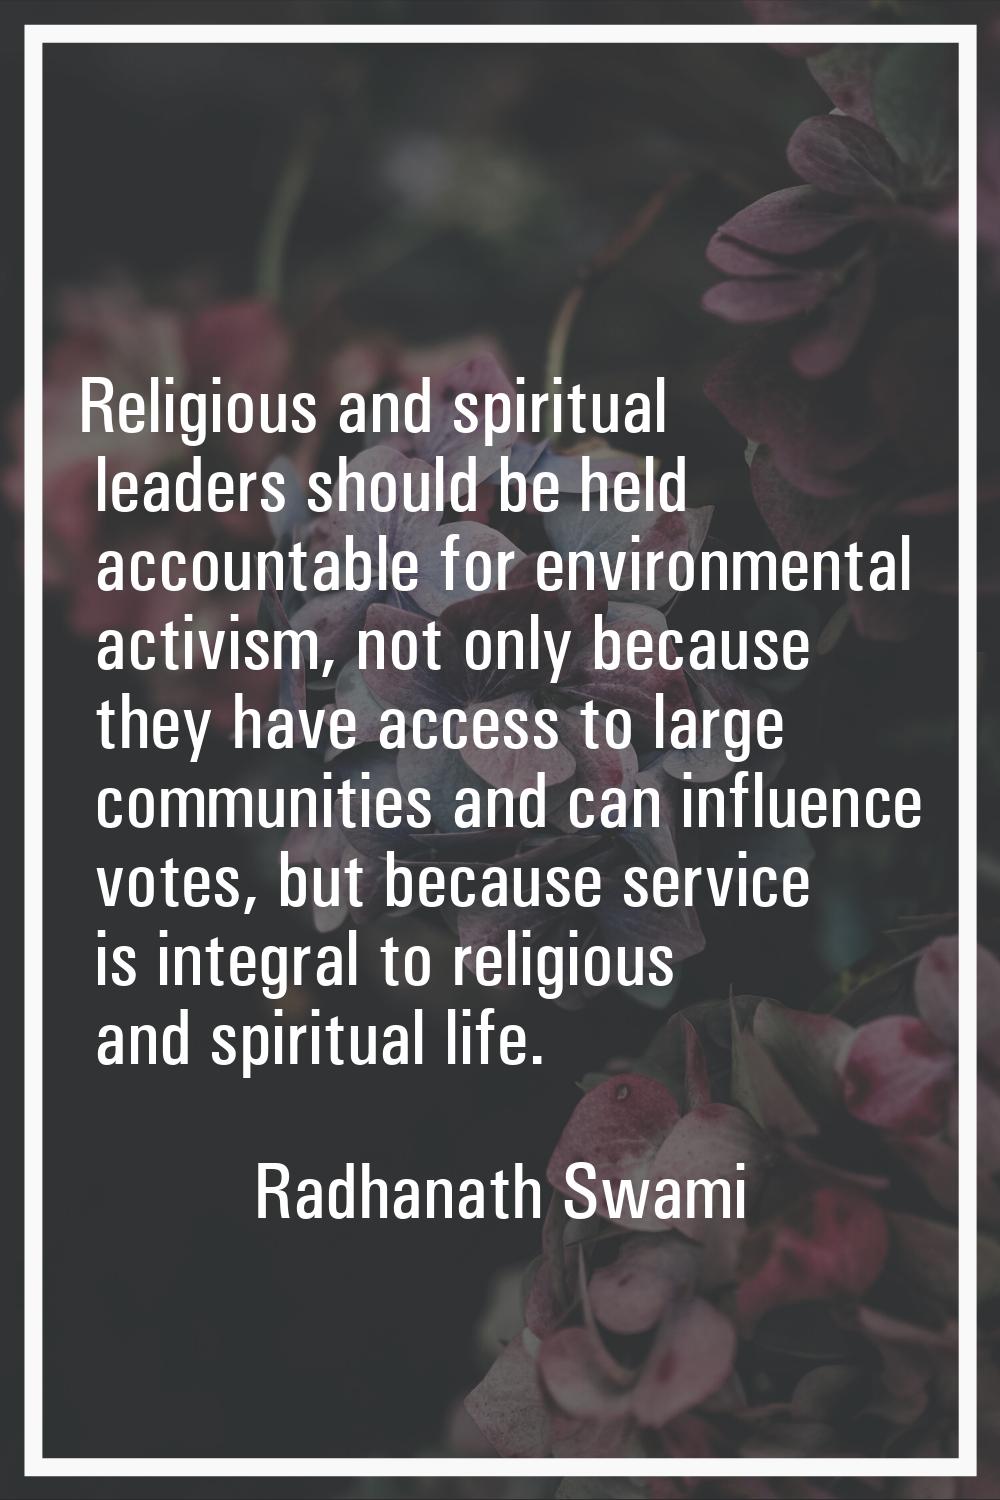 Religious and spiritual leaders should be held accountable for environmental activism, not only bec